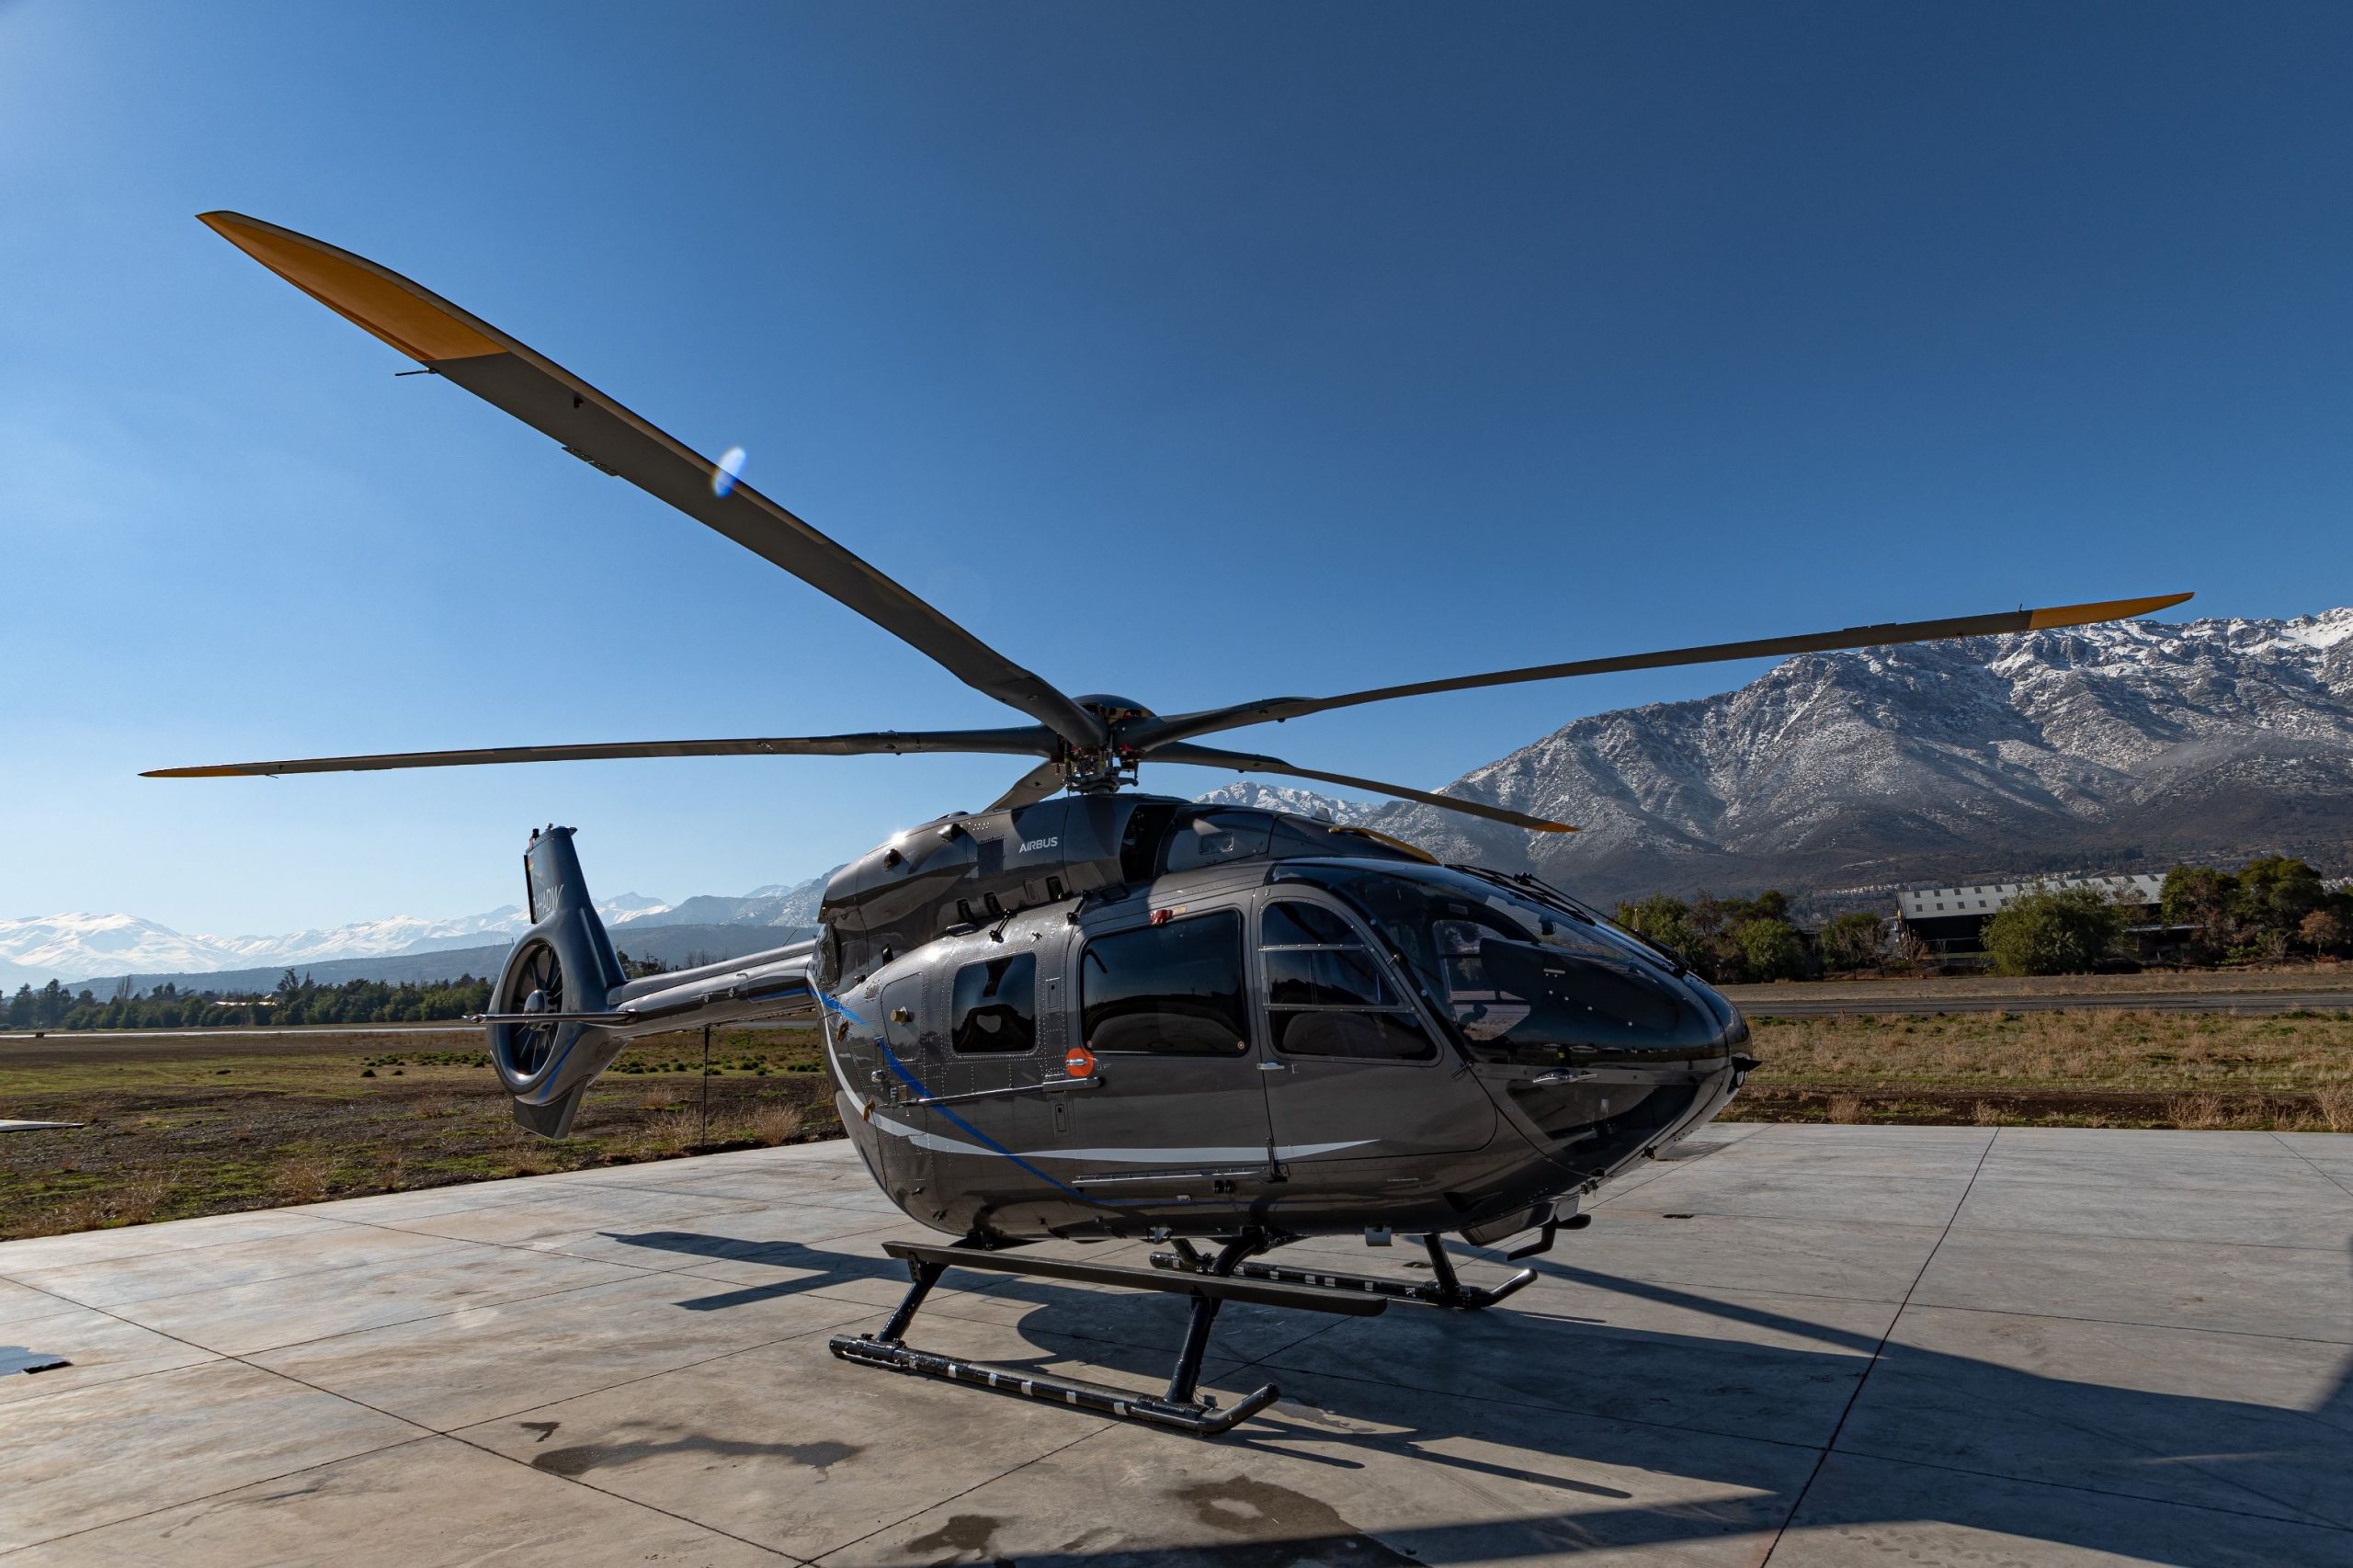 H145 luxury helicopter shown on the ground